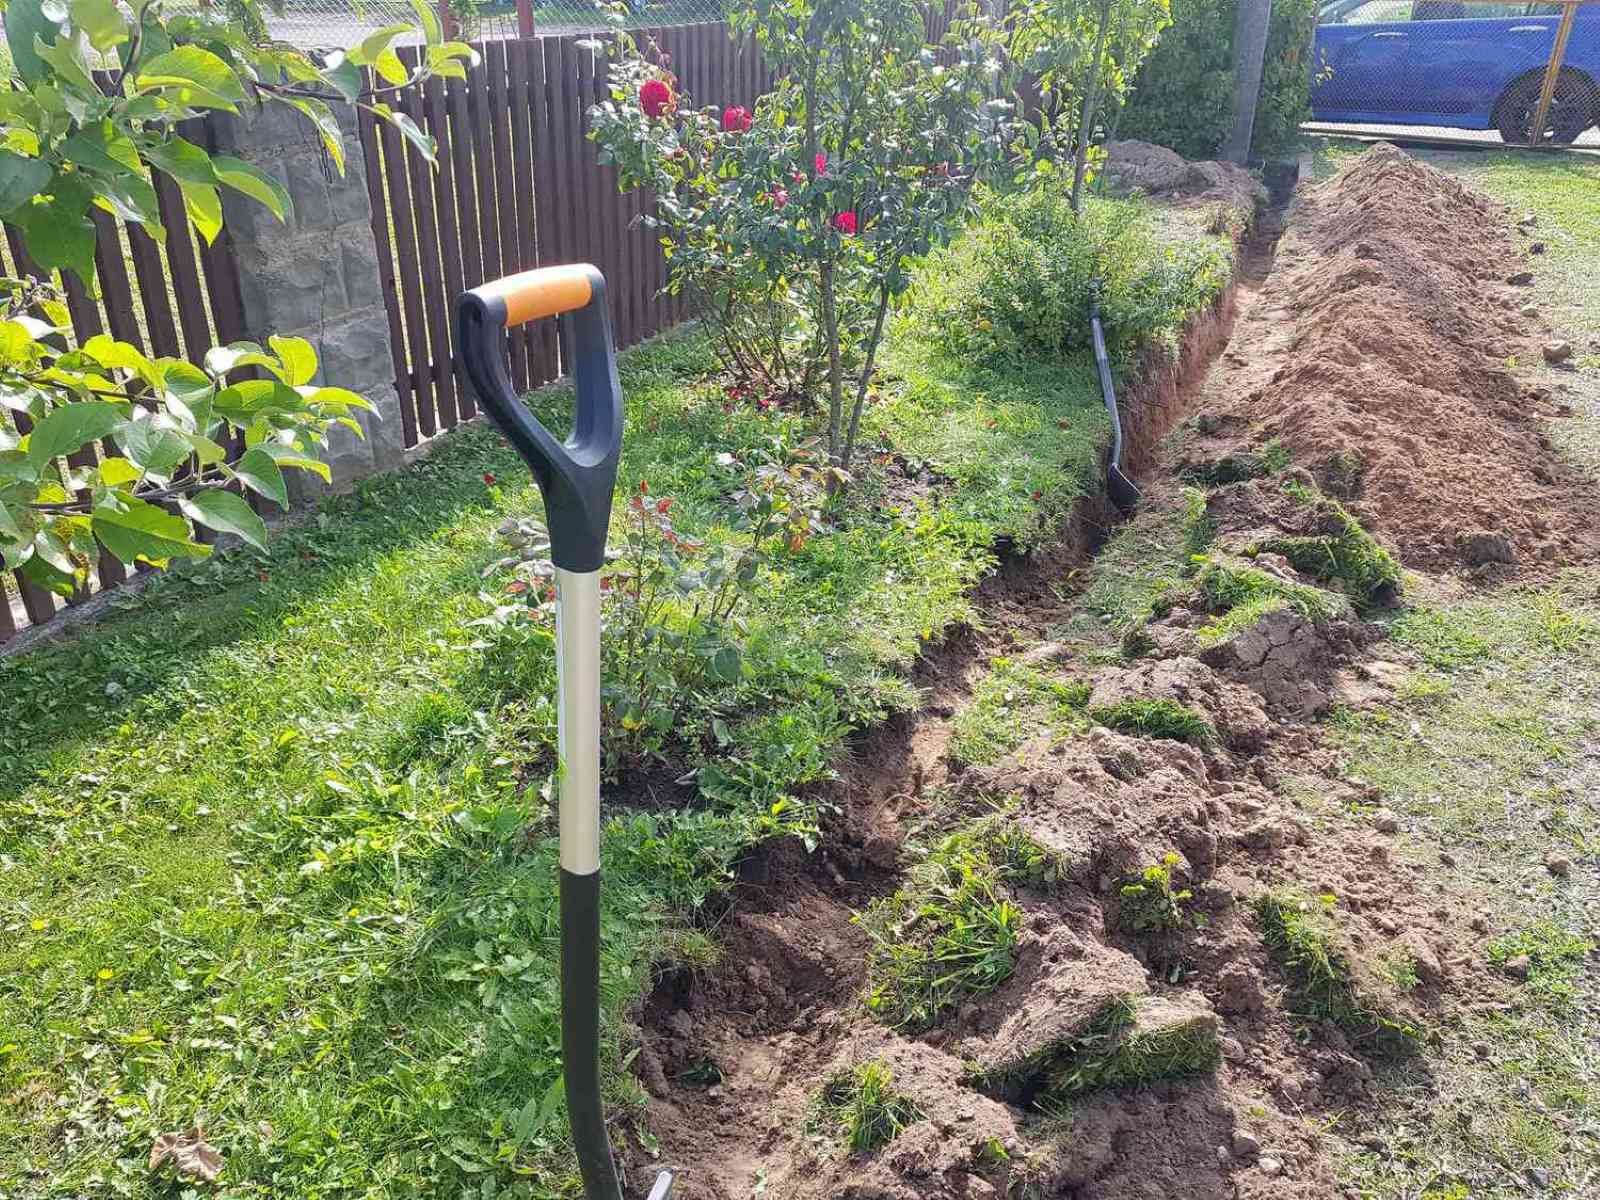 How To Get Good Drainage In Garden Soil